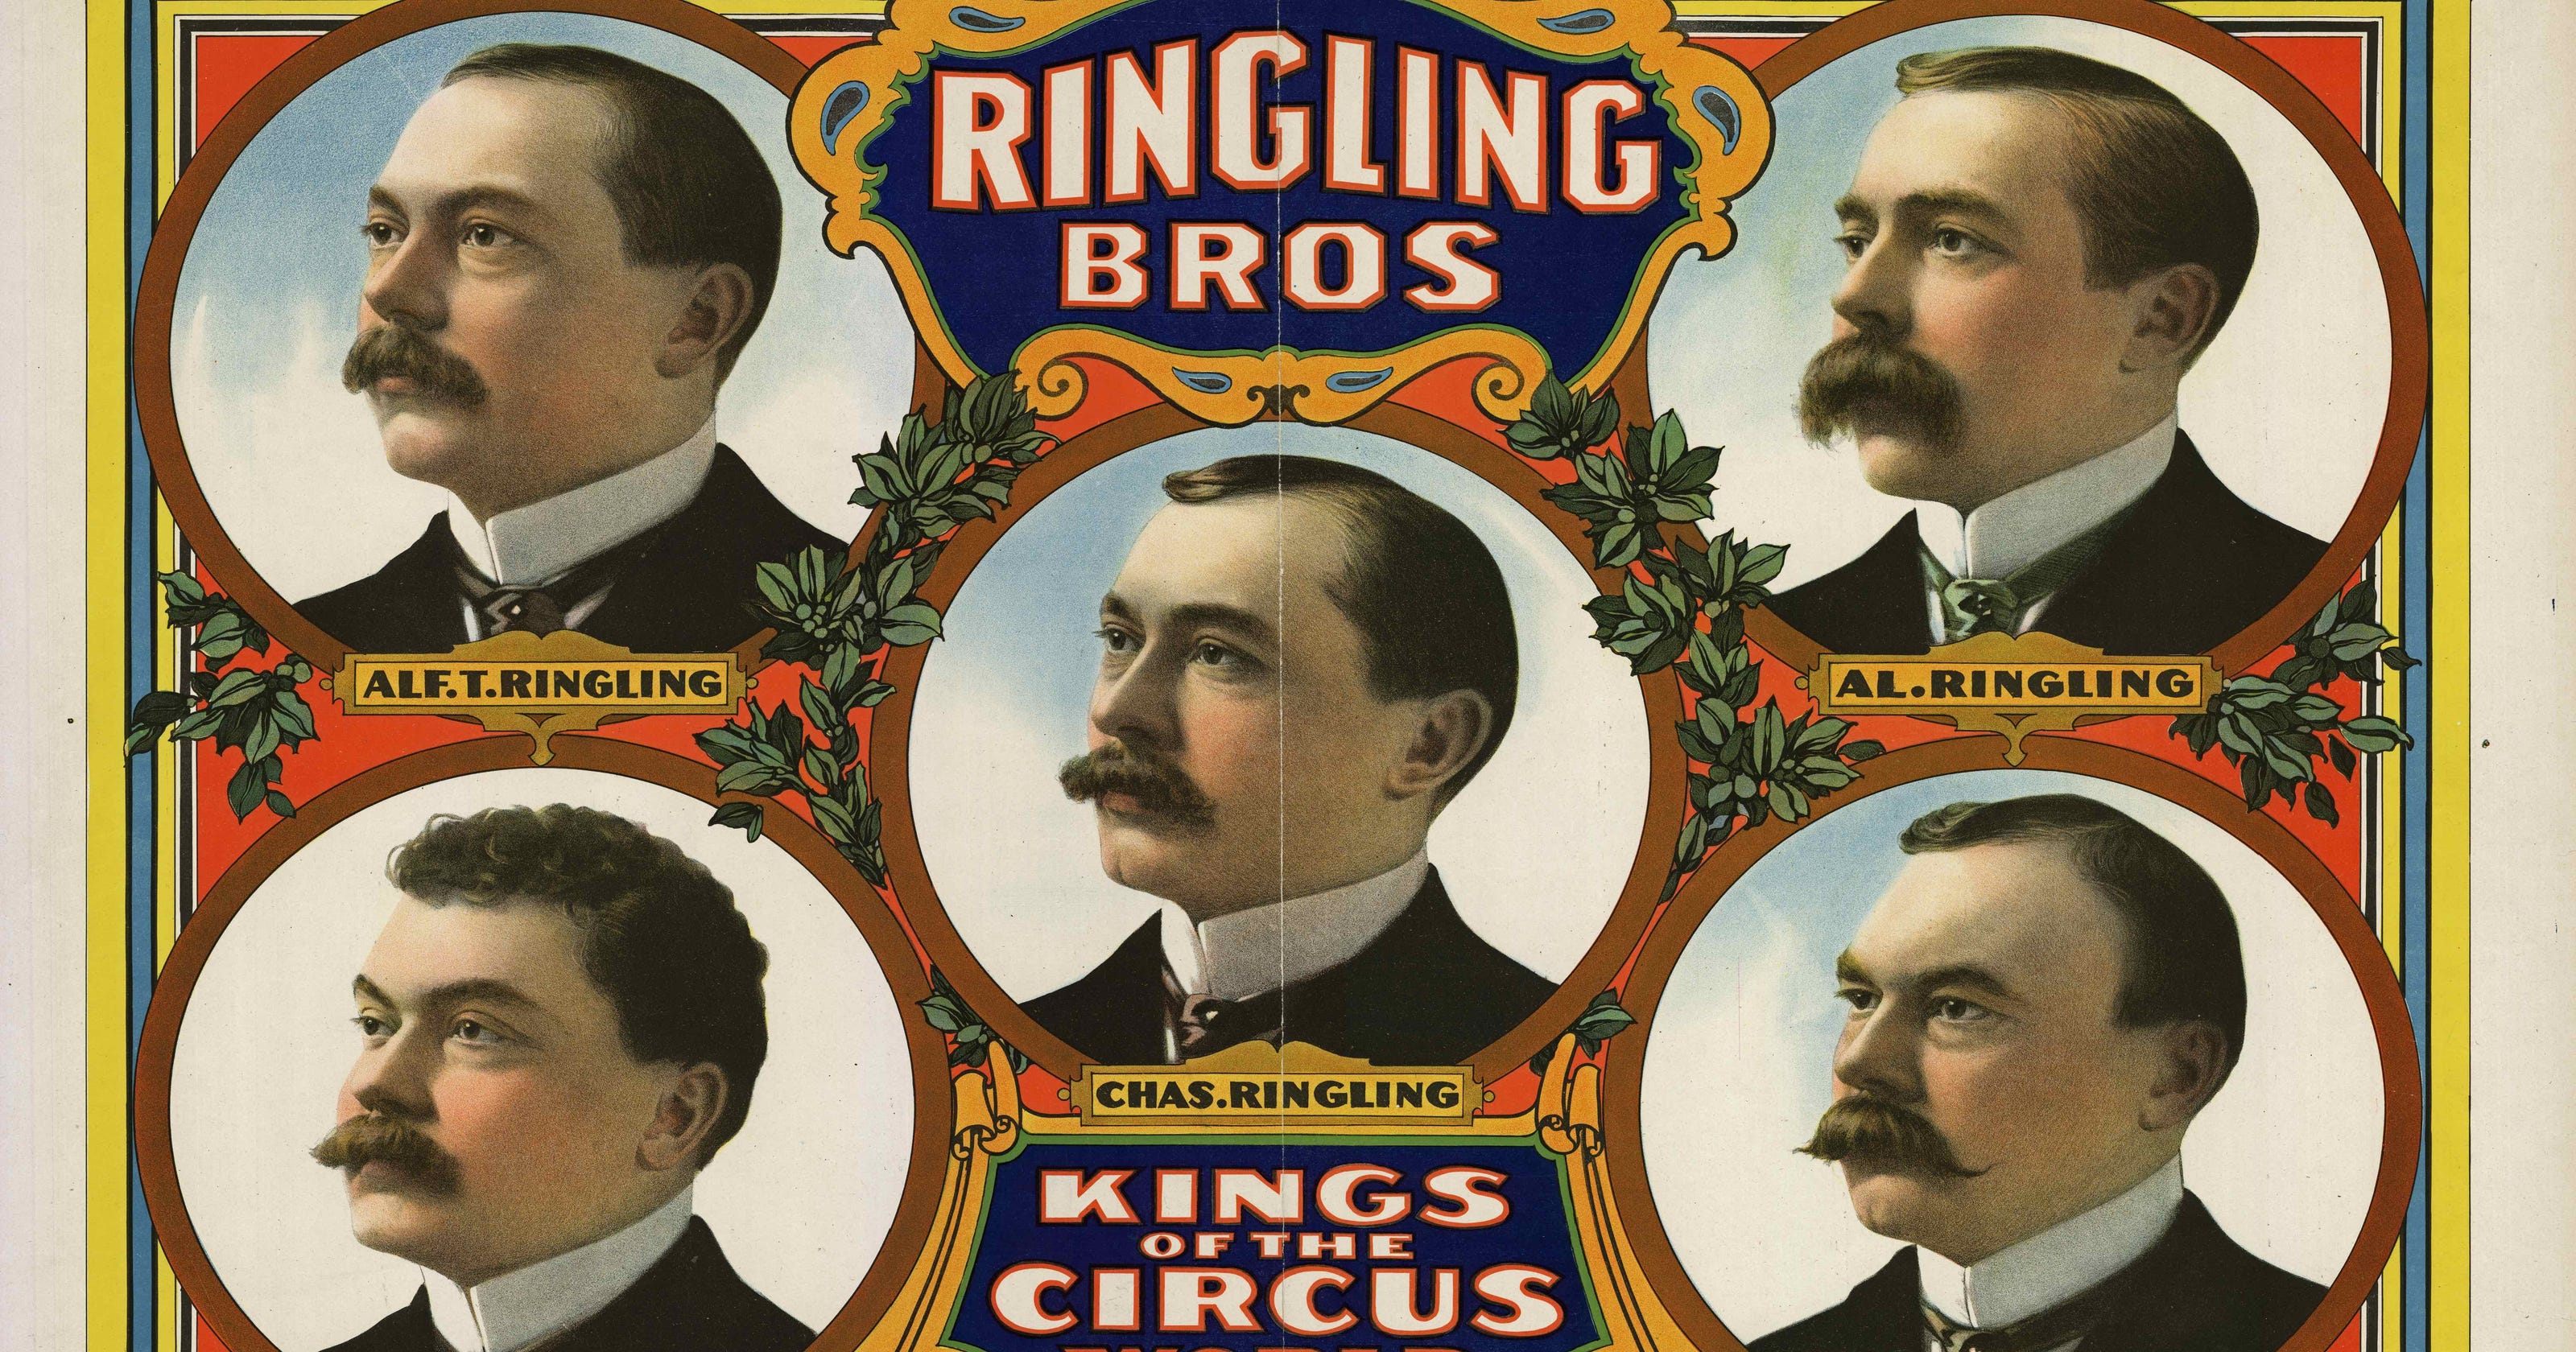 PBS documentary on history of U.S. circuses features ...